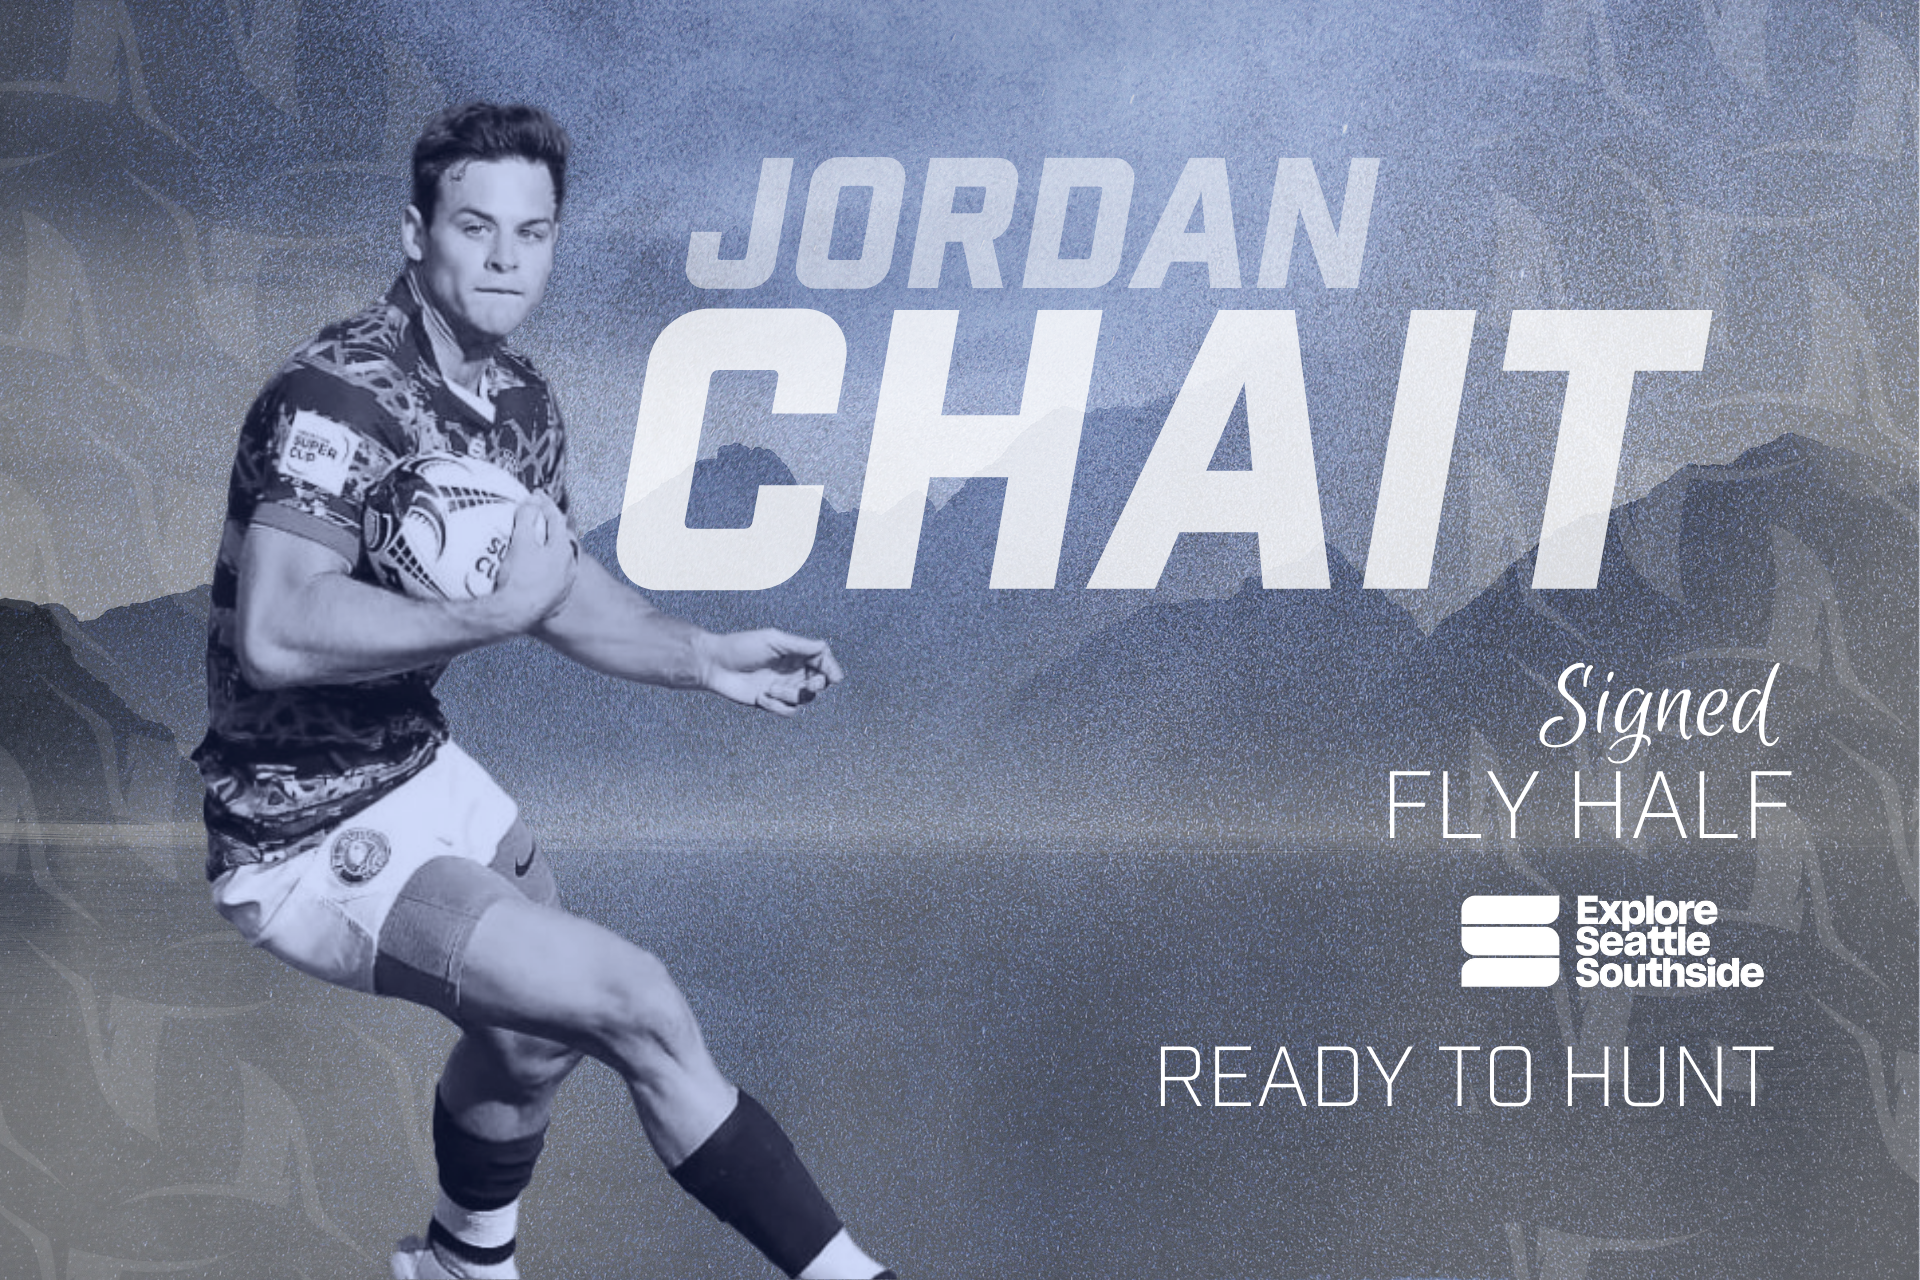 Rising Rugby Talent Jordan Chait joins the Seawolves